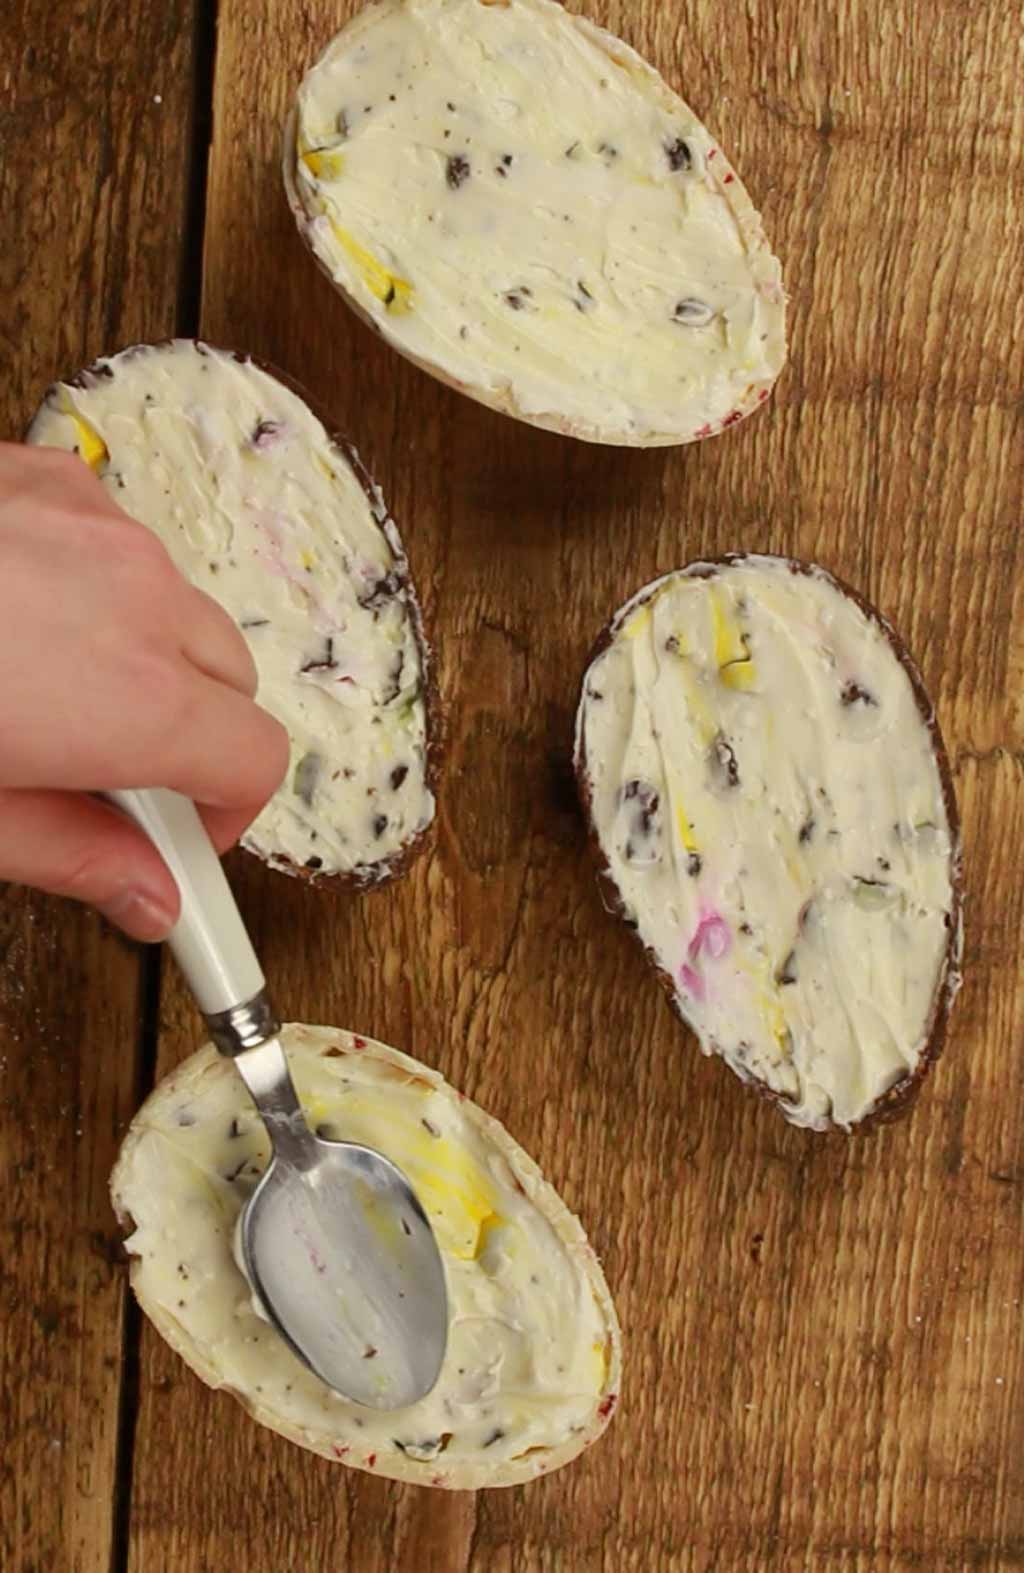 Smoothing Cheesecake Filling Into Chocoalte Eggs